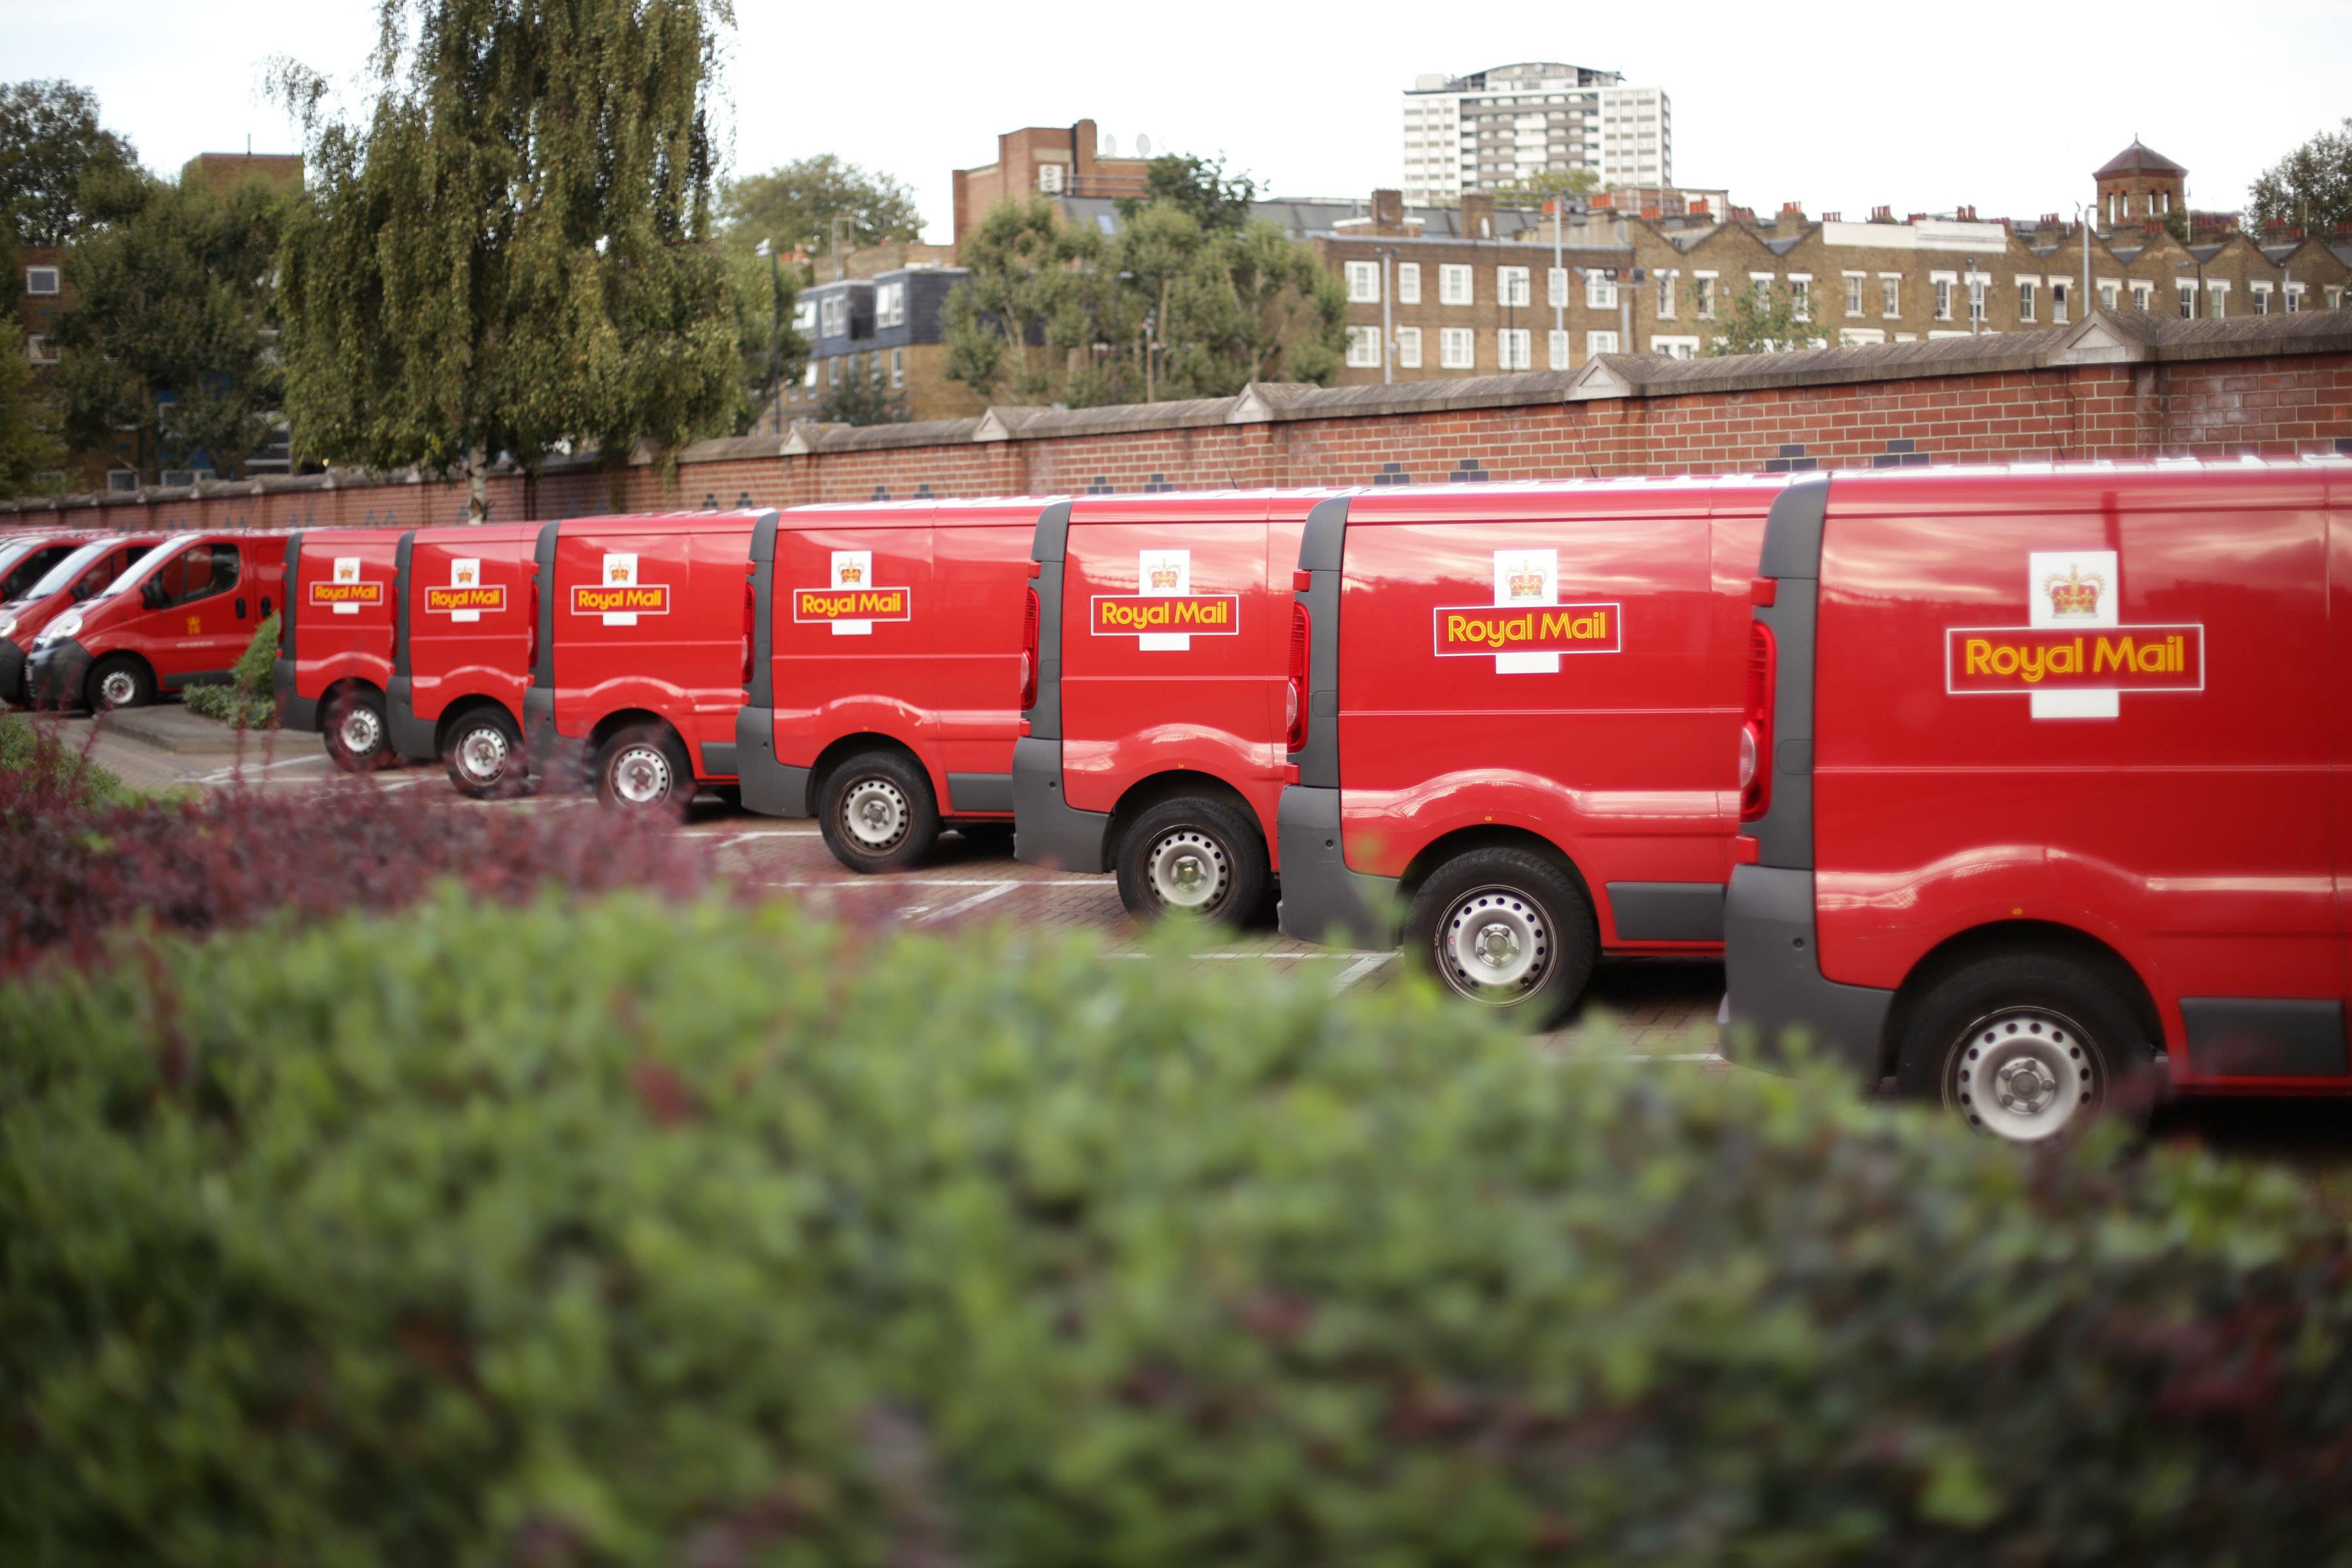 More than 100,000 frontline workers at Royal Mail are in line for a bonus worth up to £500 each if they hit targets over Christmas (Yui Mok/PA)